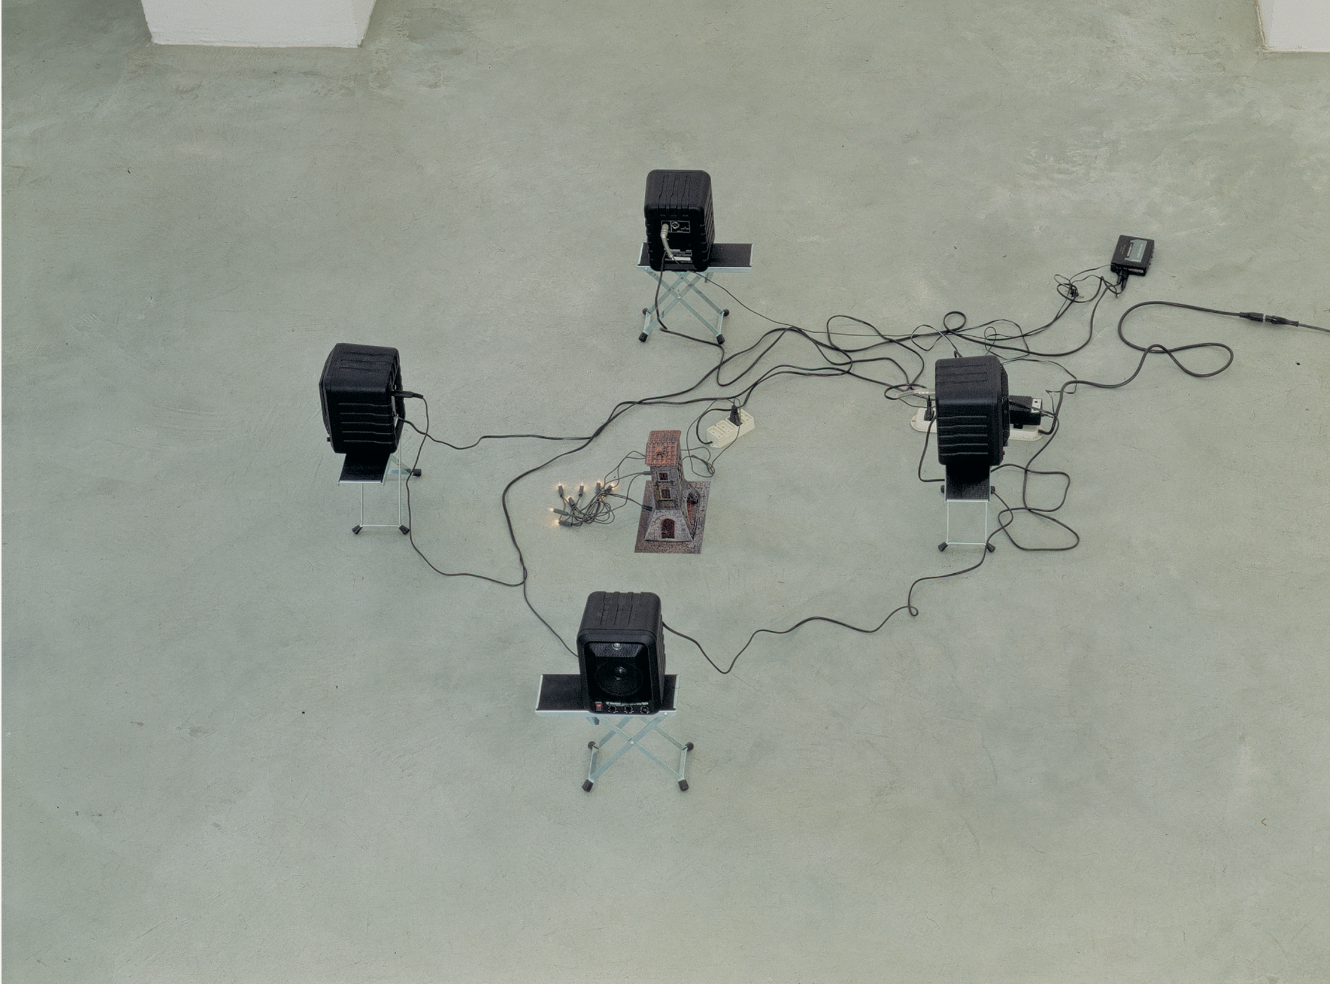 Liliana Moro, Nessuno, 4 acoustic speakers, guitar stand, paper construction, flashing lights, speaker with recording of the artist reading the text “happy days” by Samuel Beckett, dimensions variable, 1993. Installation view, Liliana Moro, Nessuno, Emi Fontana Gallery, Milan, 1993